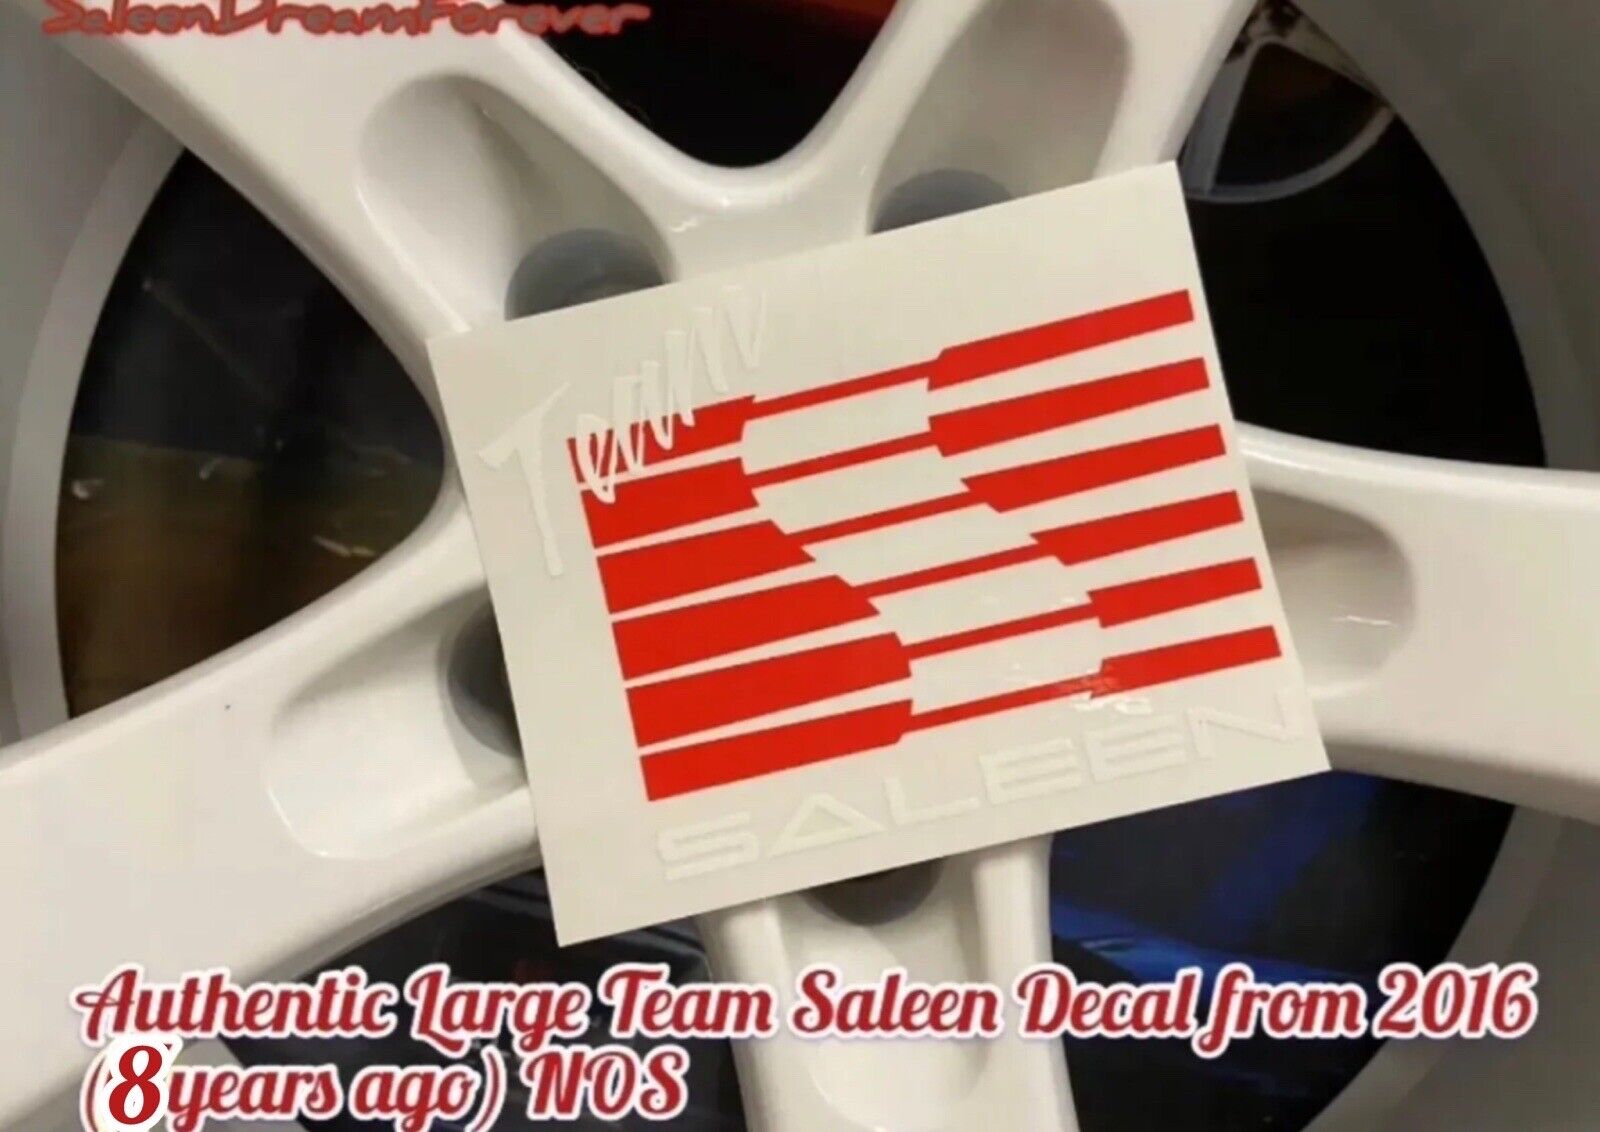 LARGE WHITE & RED TEAM SALEEN DECAL FRM 2016 NOS S281 S302 S331 MUSTANG FORD GT 